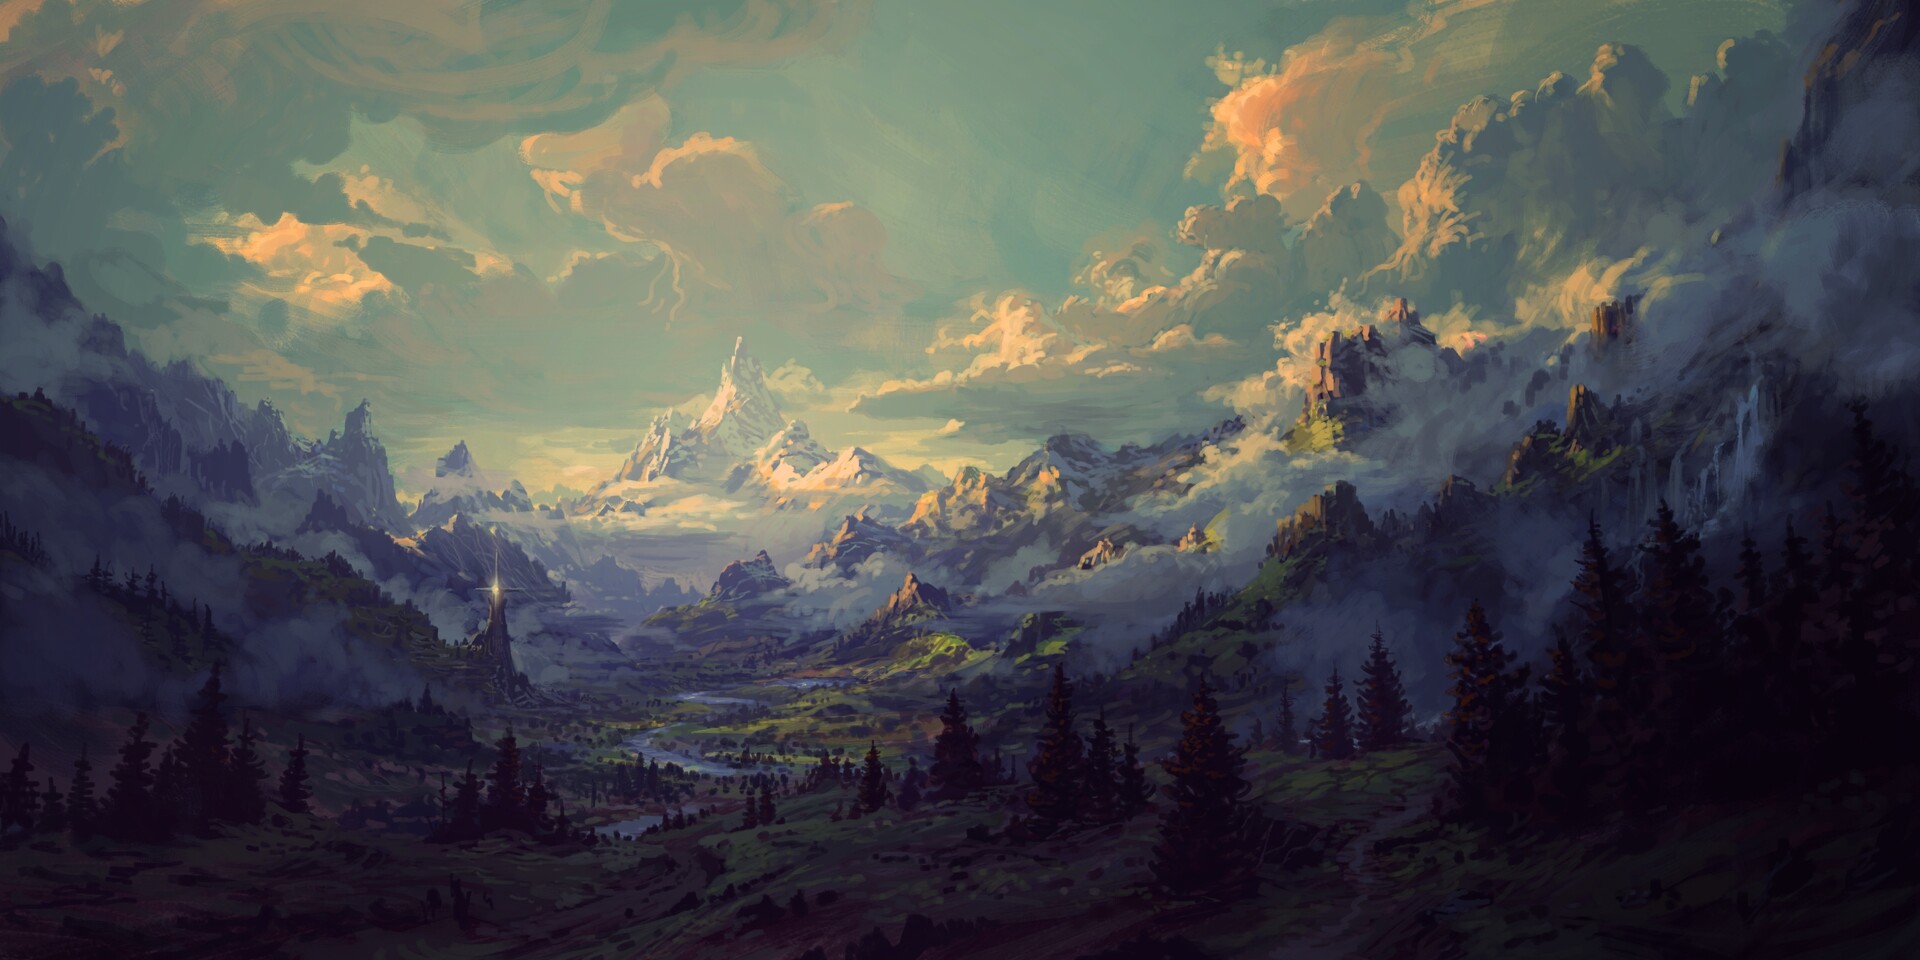 Cloudy Artistic Landscape 2021 Wallpapers